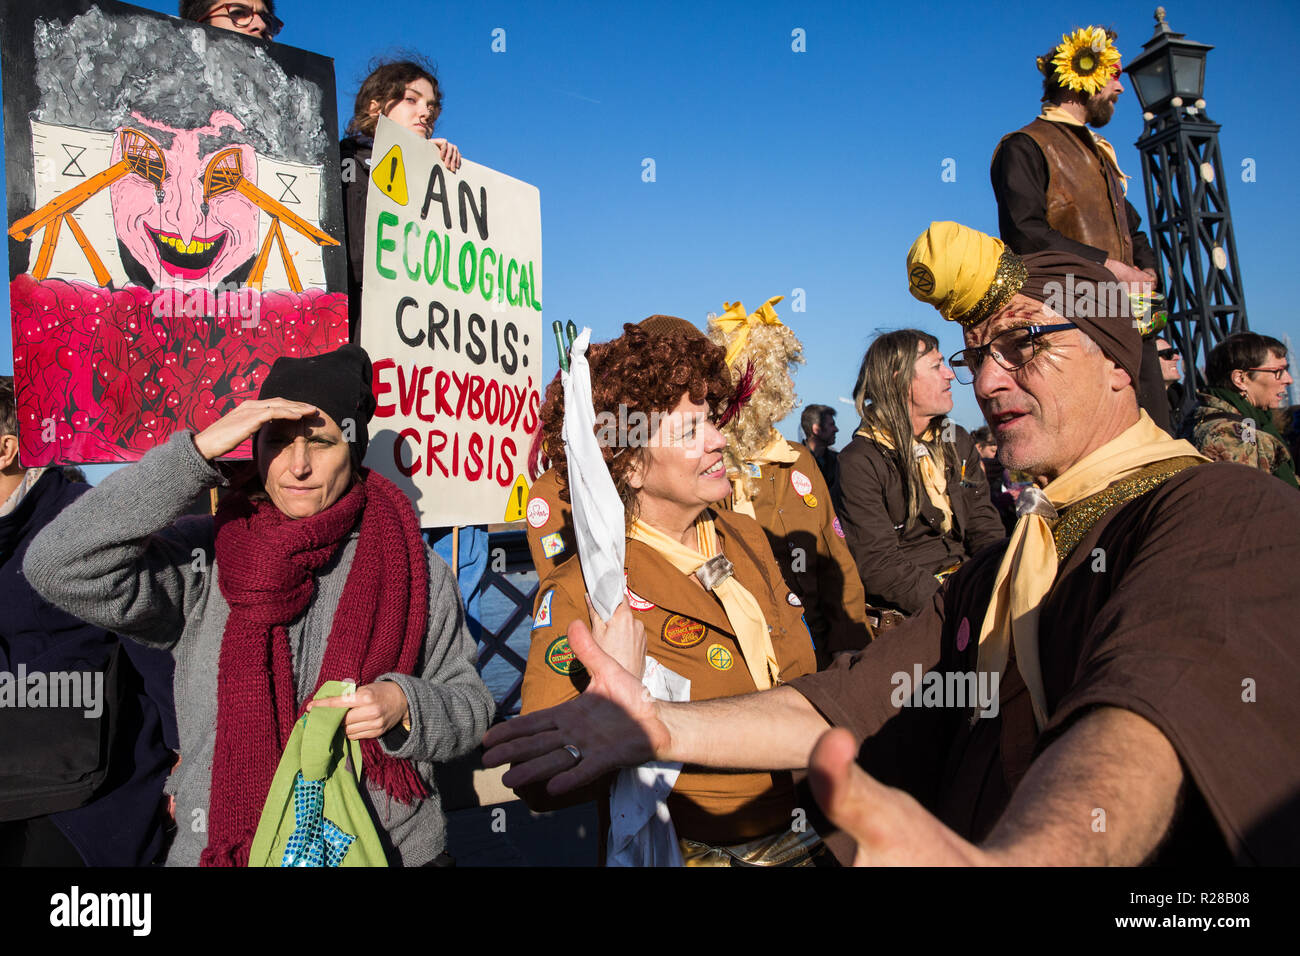 London, UK. 17th November, 2018. Environmental campaigners from Extinction Rebellion block Lambeth Bridge, one of five bridges blocked in central London, as part of a Rebellion Day event to highlight 'criminal inaction in the face of climate change catastrophe and ecological collapse' by the UK Government as part of a programme of civil disobedience during which scores of campaigners have been arrested. Credit: Mark Kerrison/Alamy Live News Stock Photo